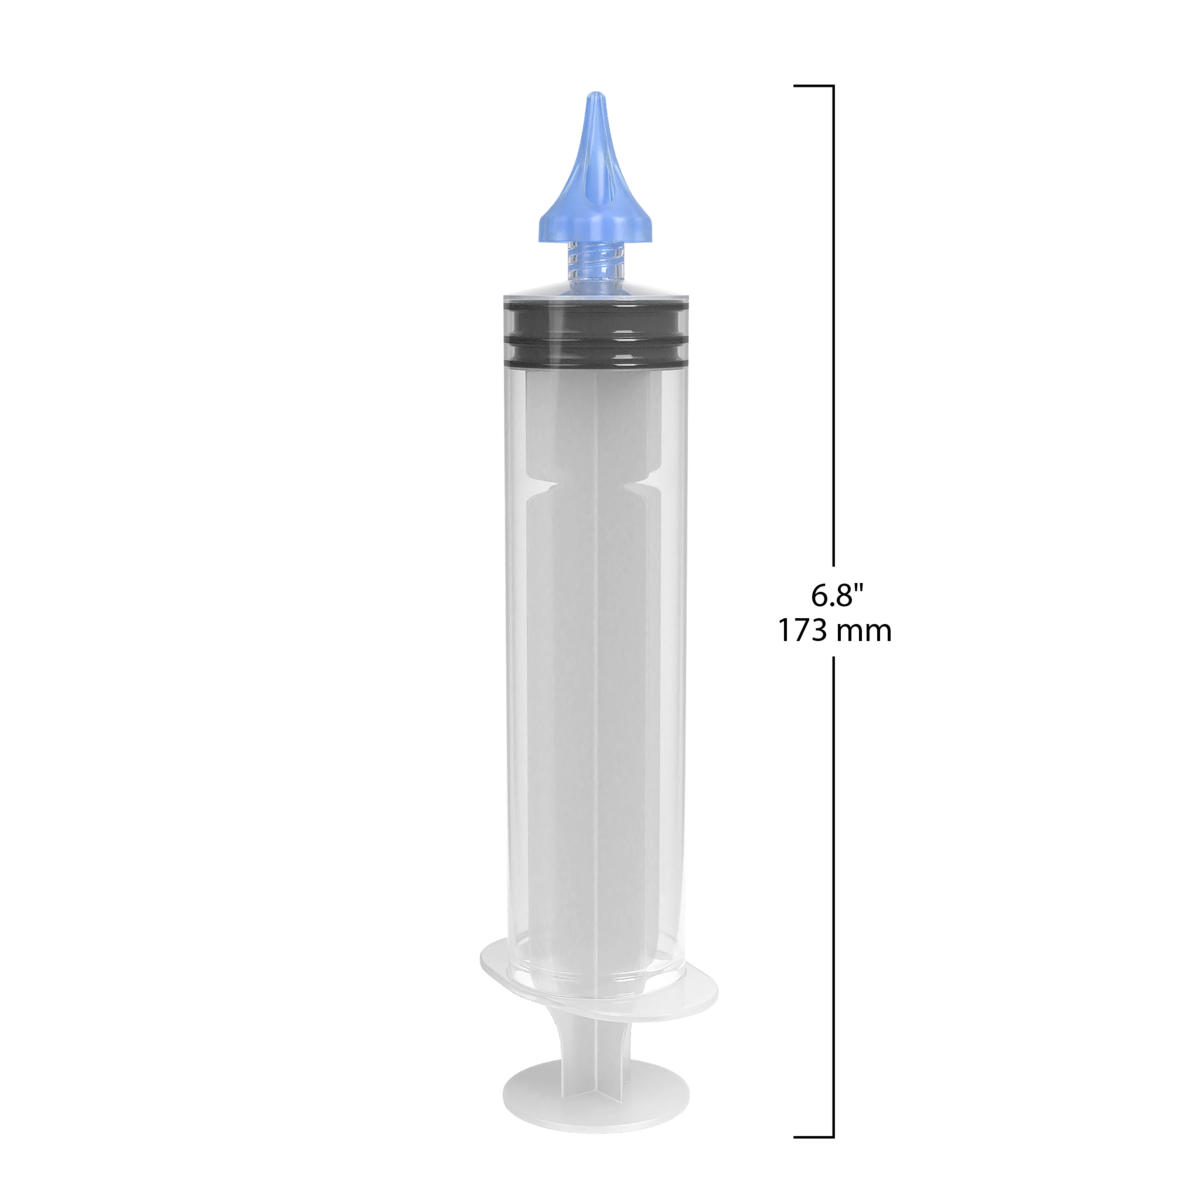 dimensions of earwax removal syringe